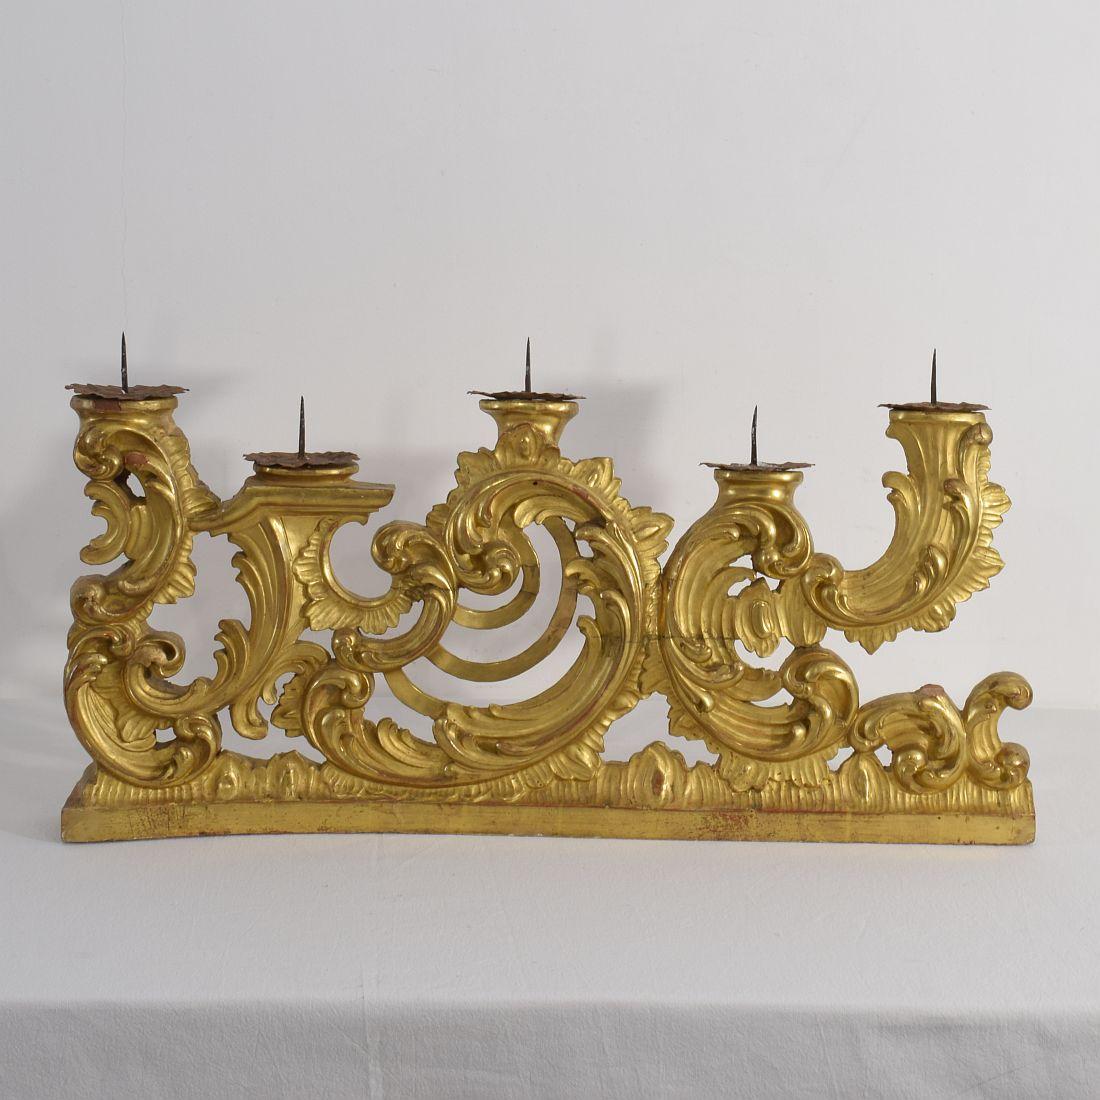 Unique Baroque giltwood candleholders for in total 10 candles, Italy, circa 1750-1780. Weathered, repairs and losses.
More pictures available on request. Measurement individual.